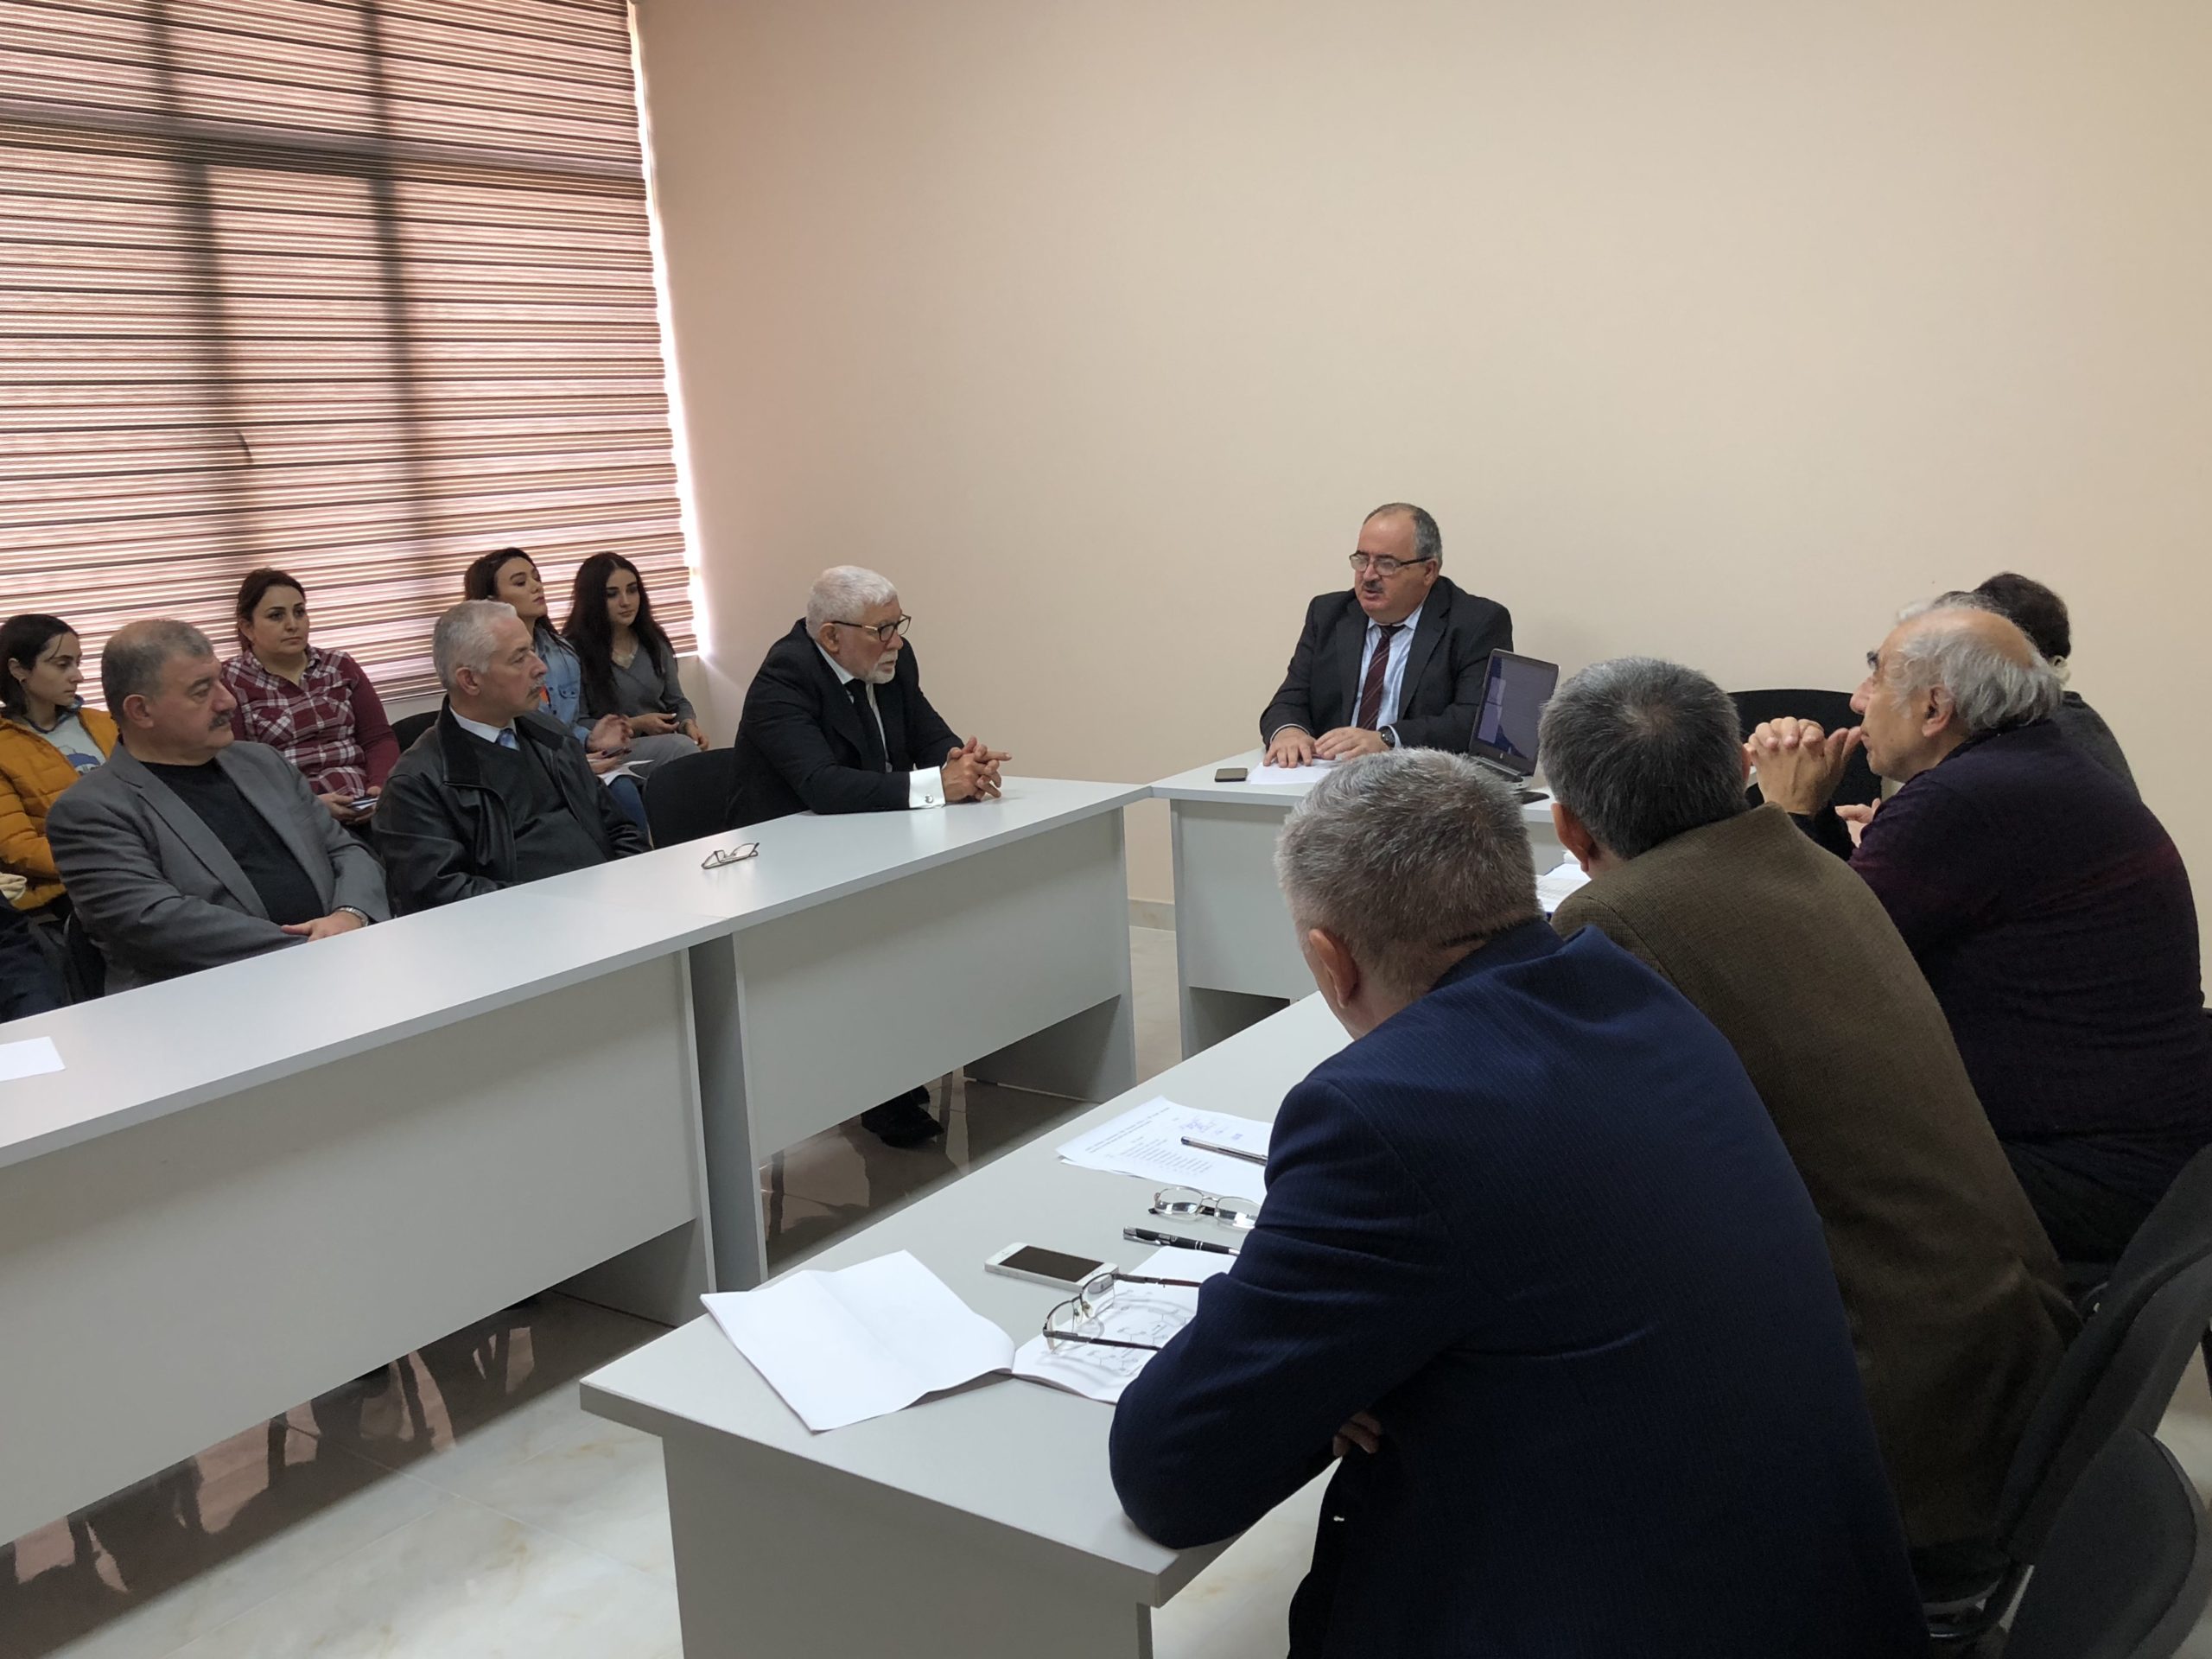 The Institute of Biophysics held a meeting of the Scientific Council